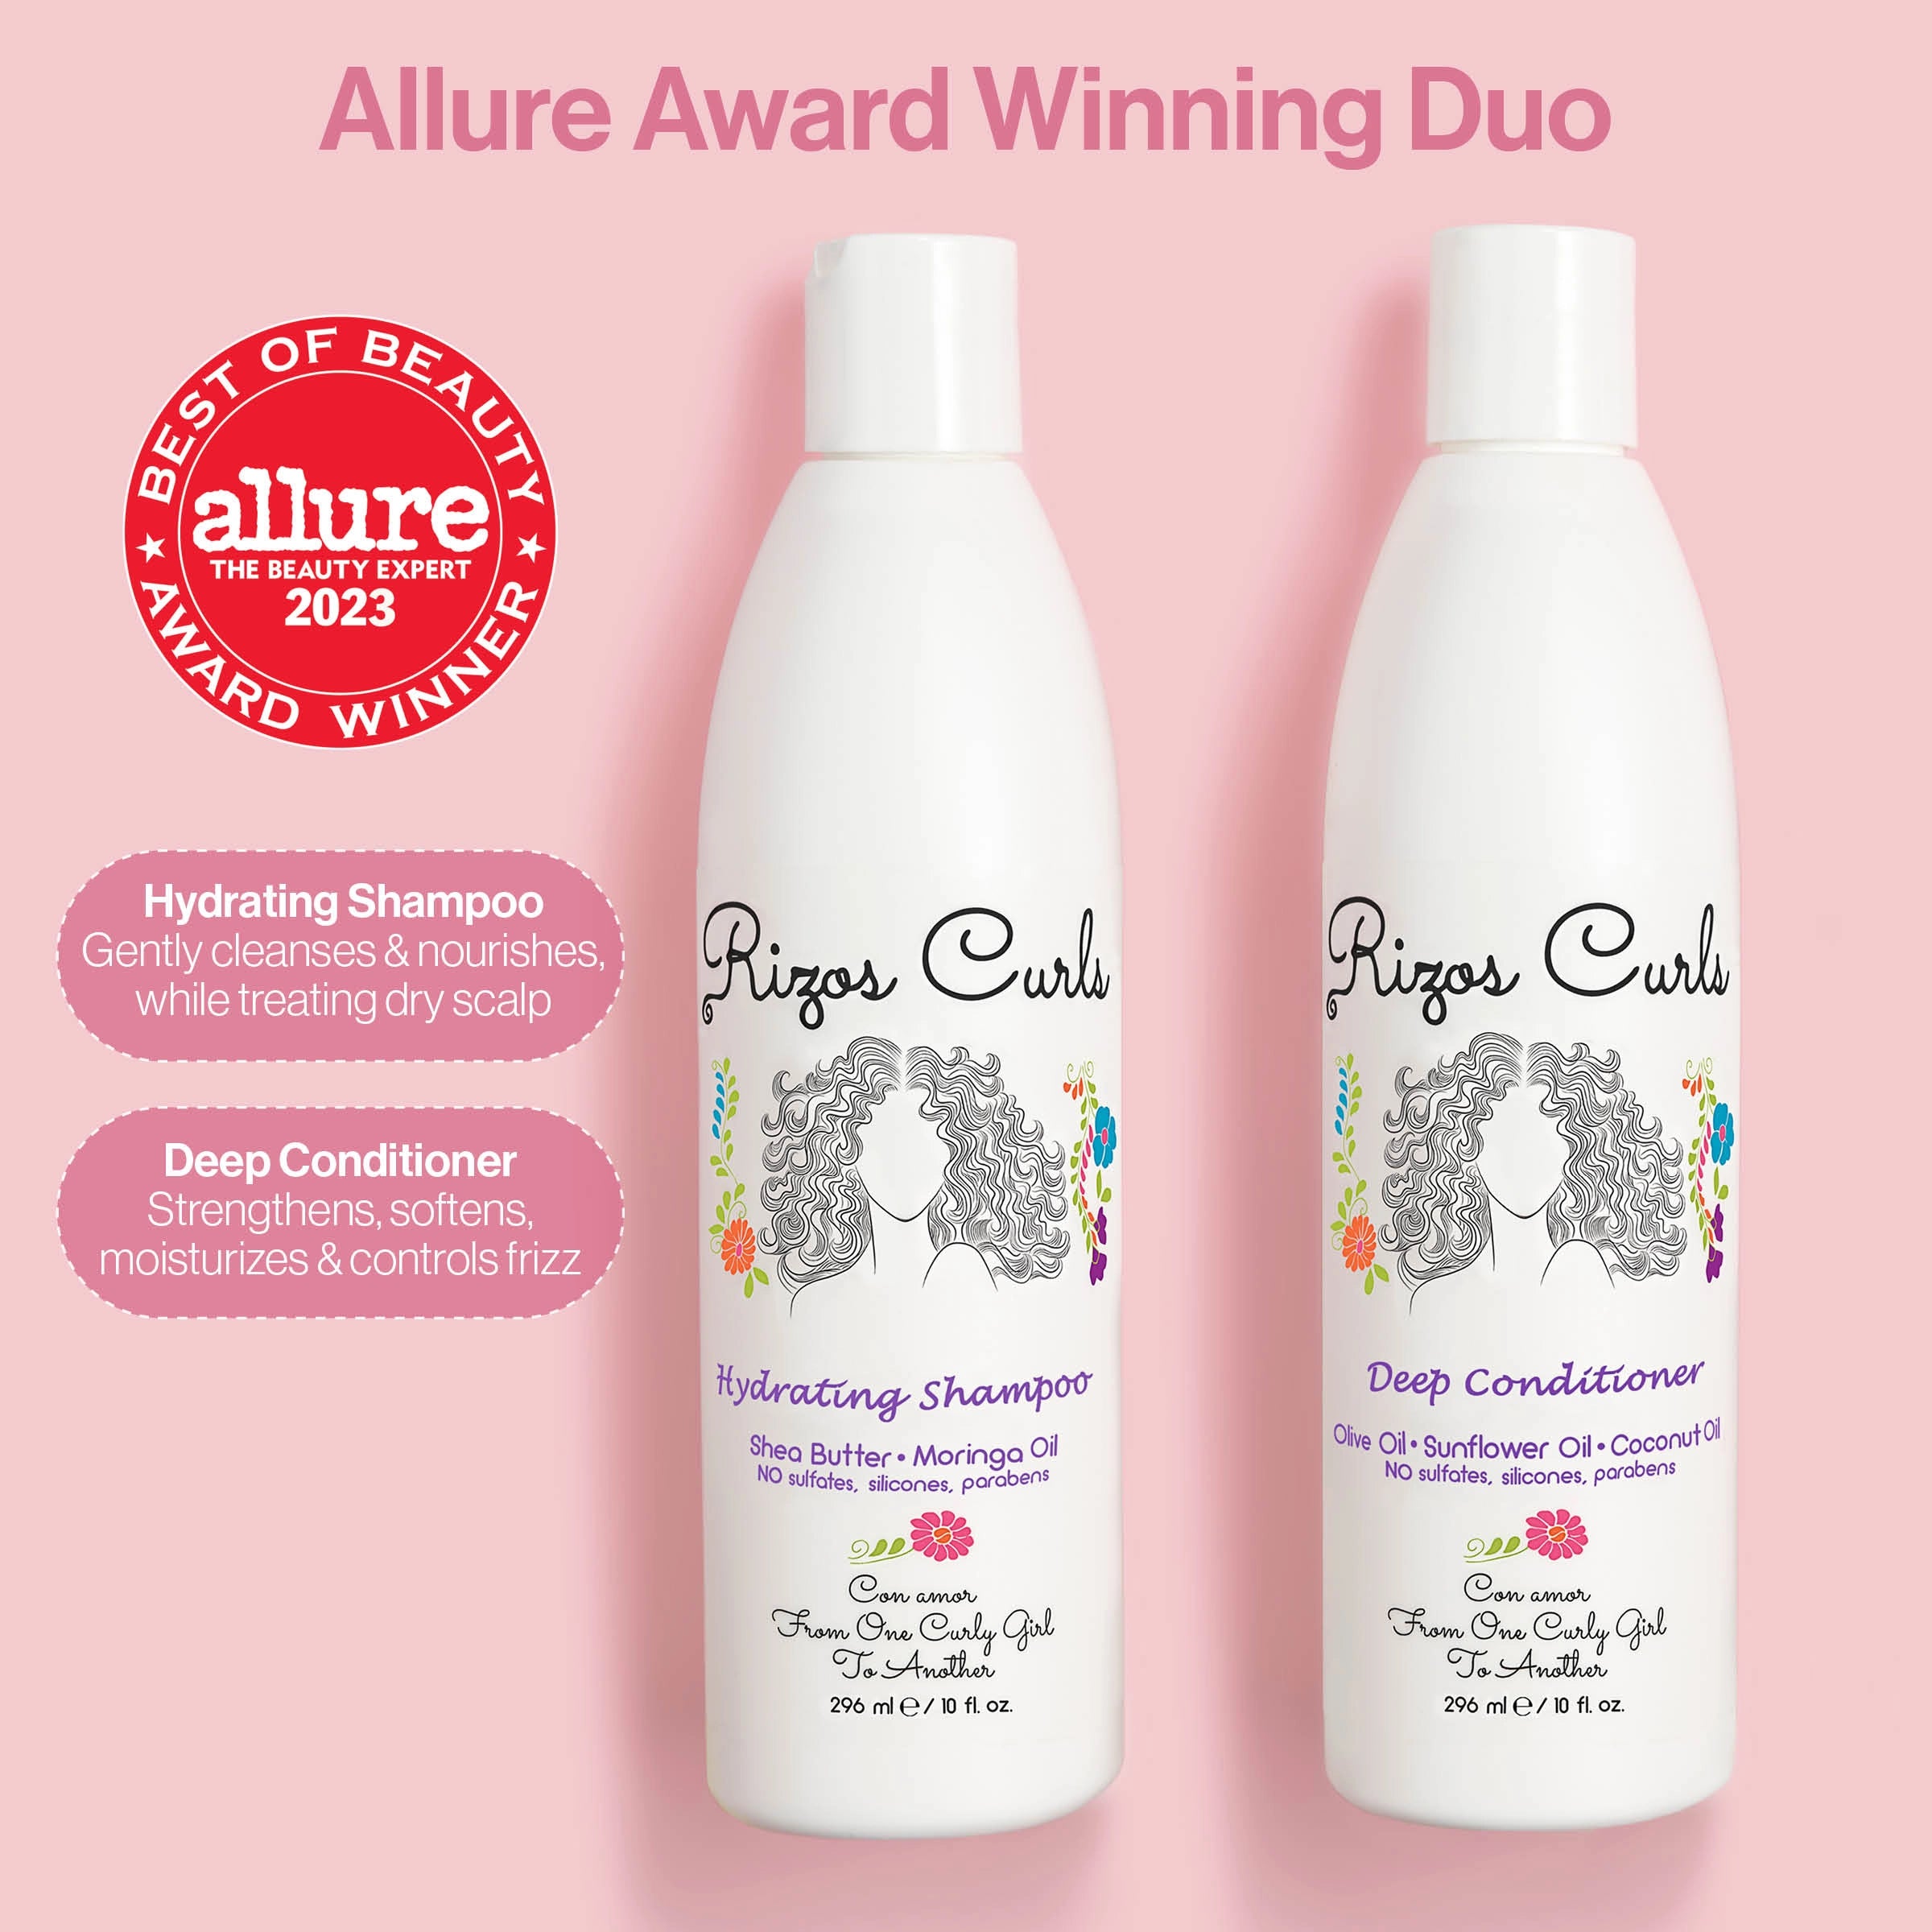 Hydrate Shampoo and Conditioner Duo